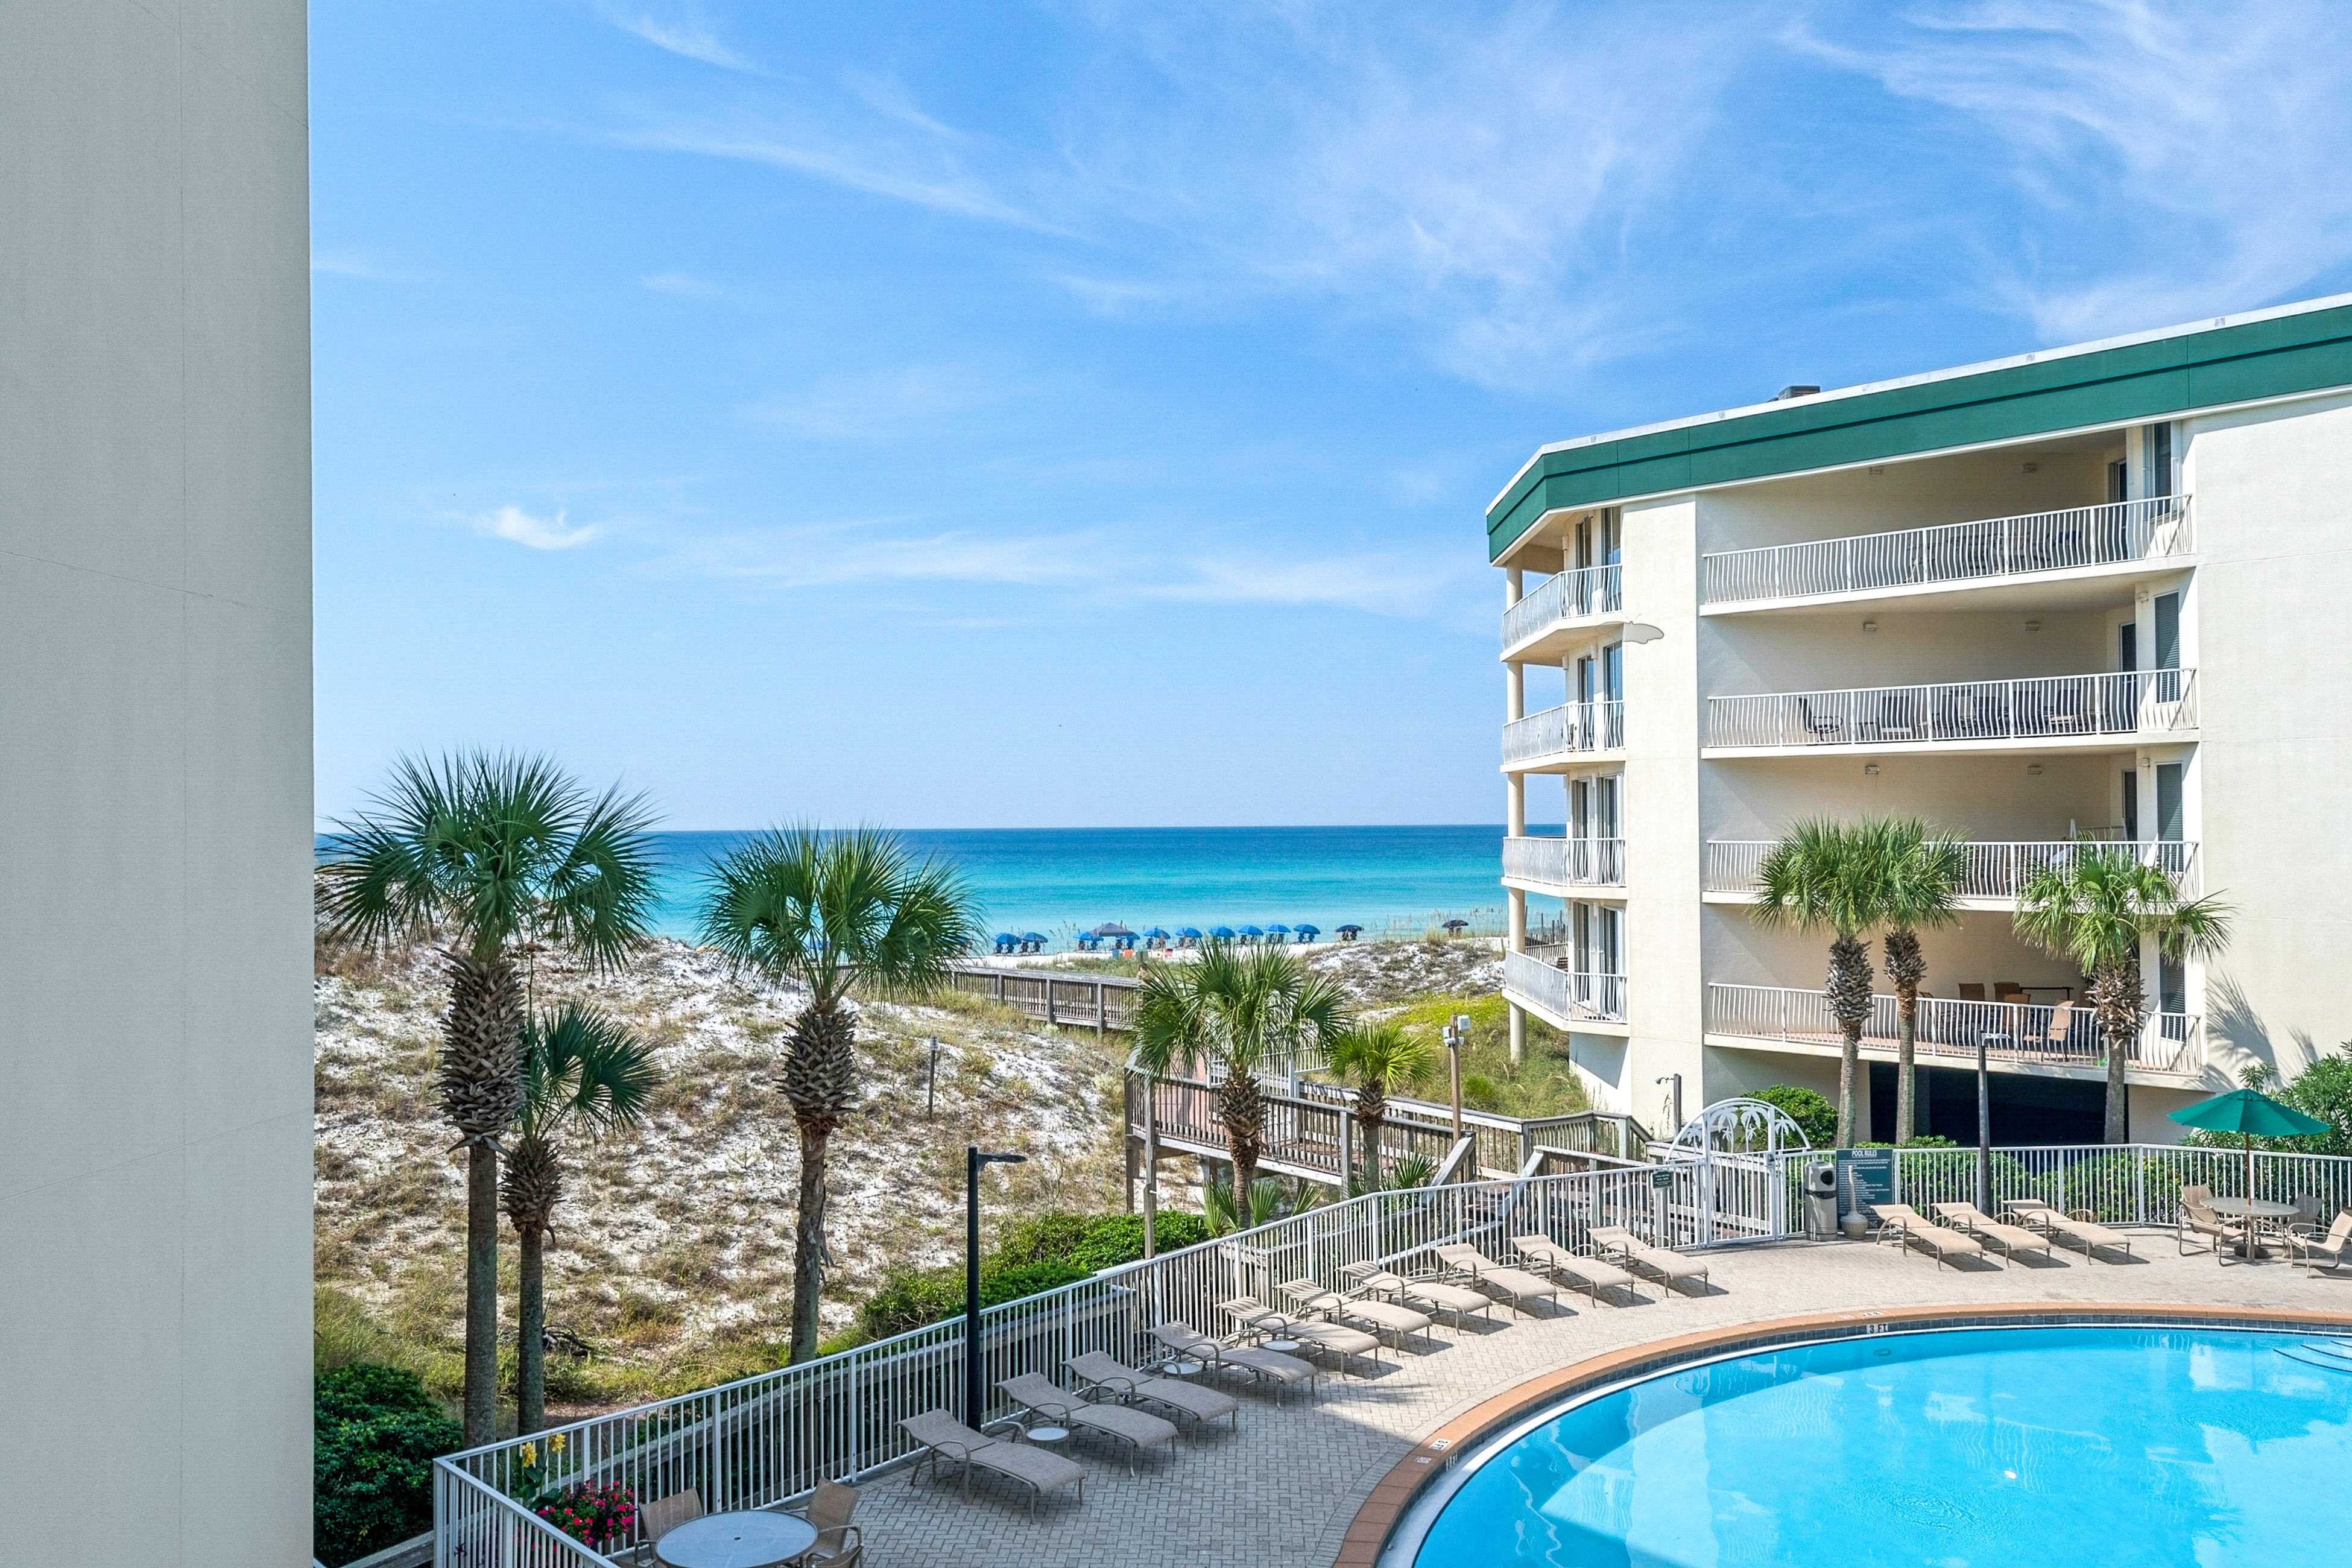 Dunes of Seagrove A206 Condo rental in Dunes of Seagrove in Highway 30-A Florida - #13